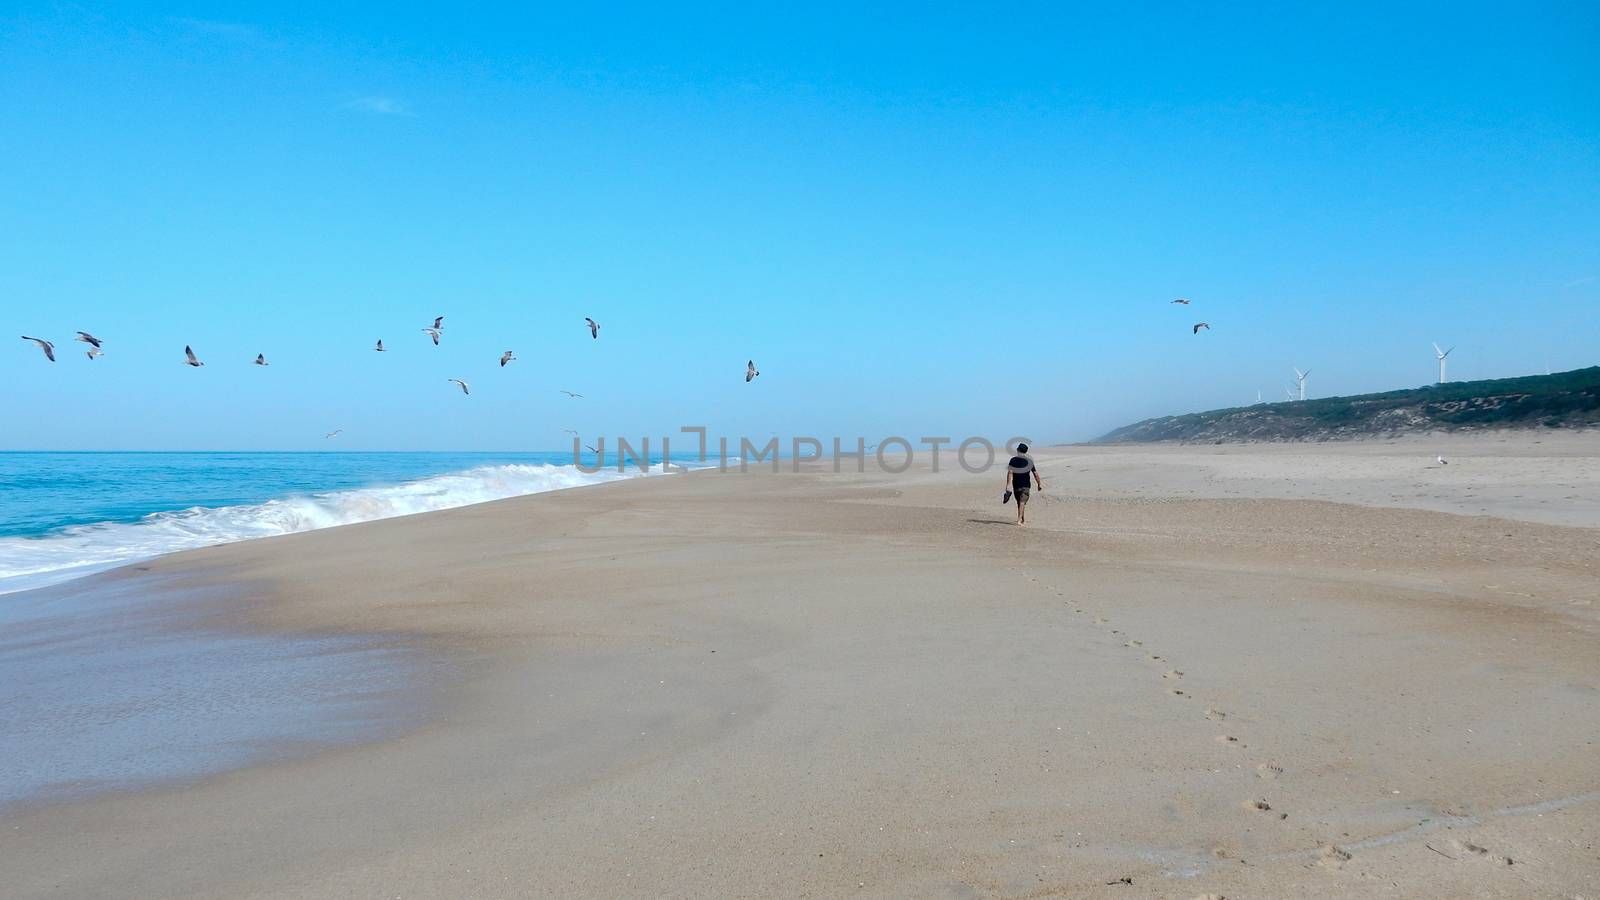 Single man solo traveller walking on rhe shore of the ocean beach with group of seagull in the blue sky - Praia do Norte Portugal by robbyfontanesi